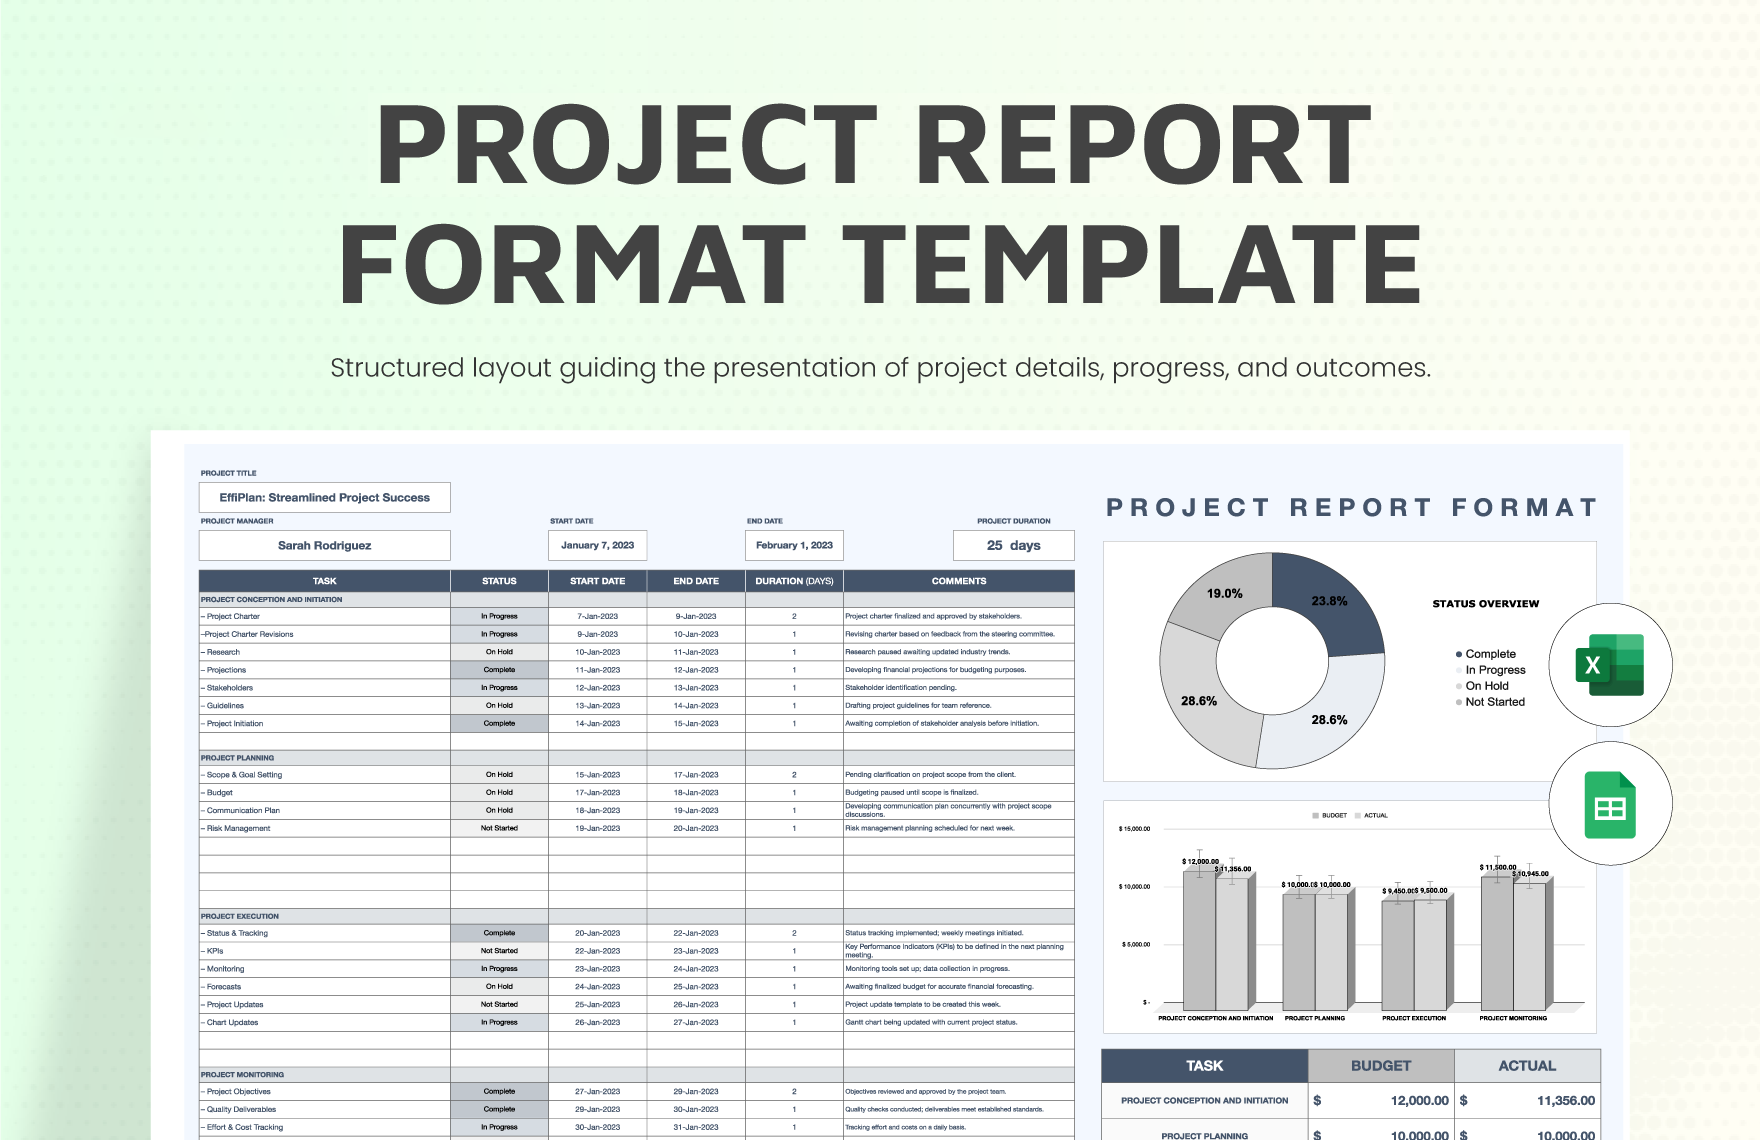 Project Report Format Template